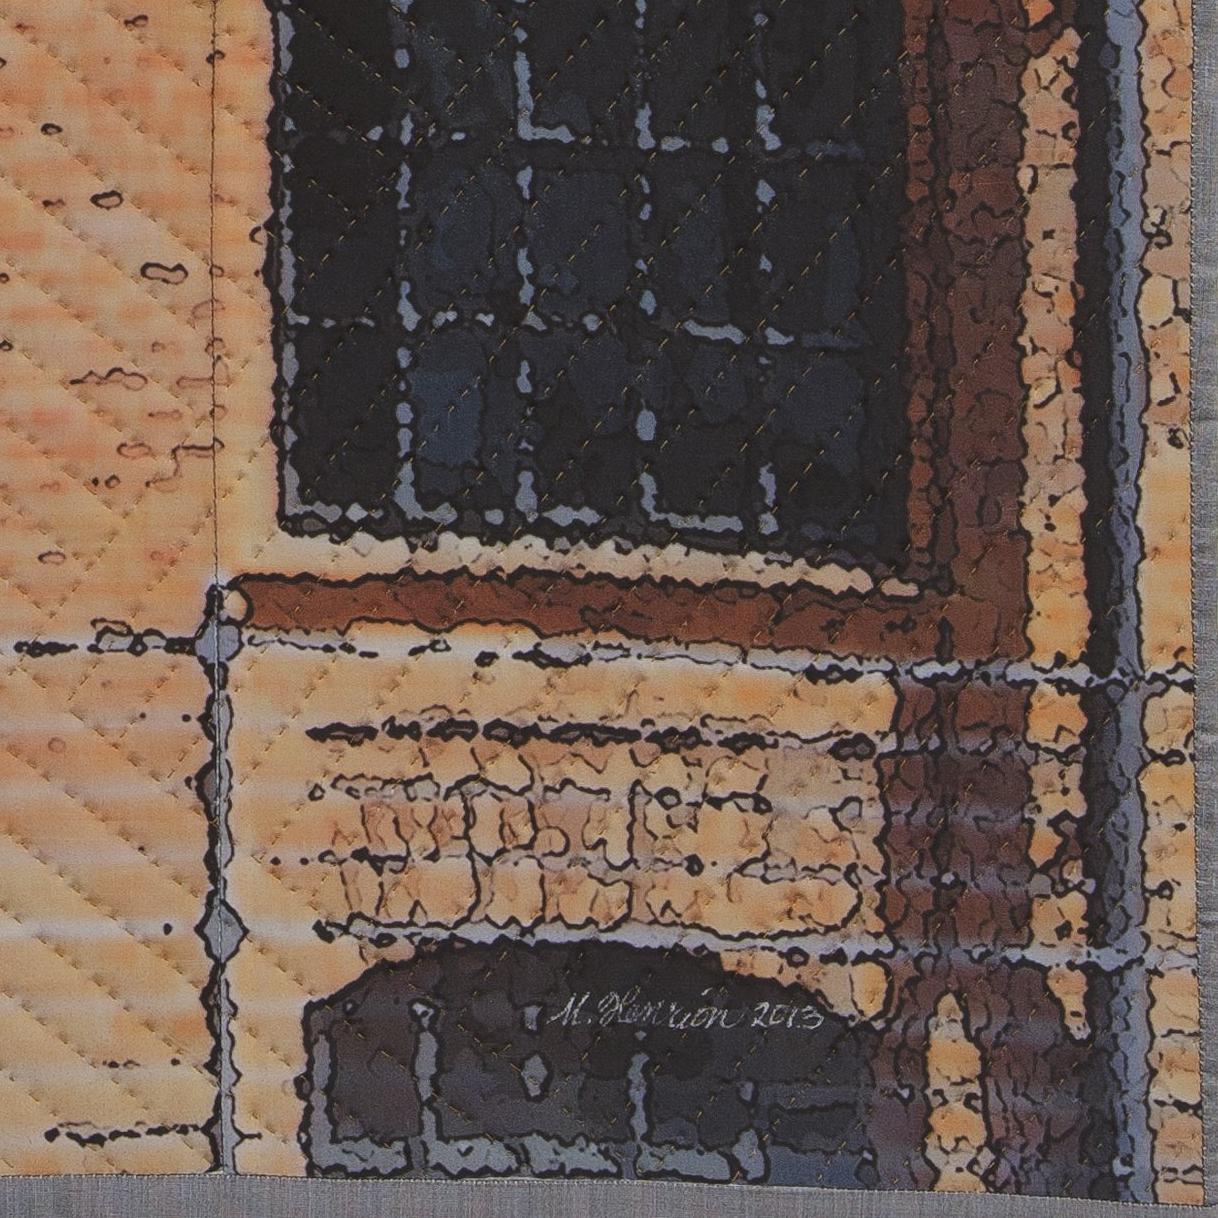 Lodz Windows 1315, Mixed Media on Canvas - Contemporary Mixed Media Art by Marilyn Henrion